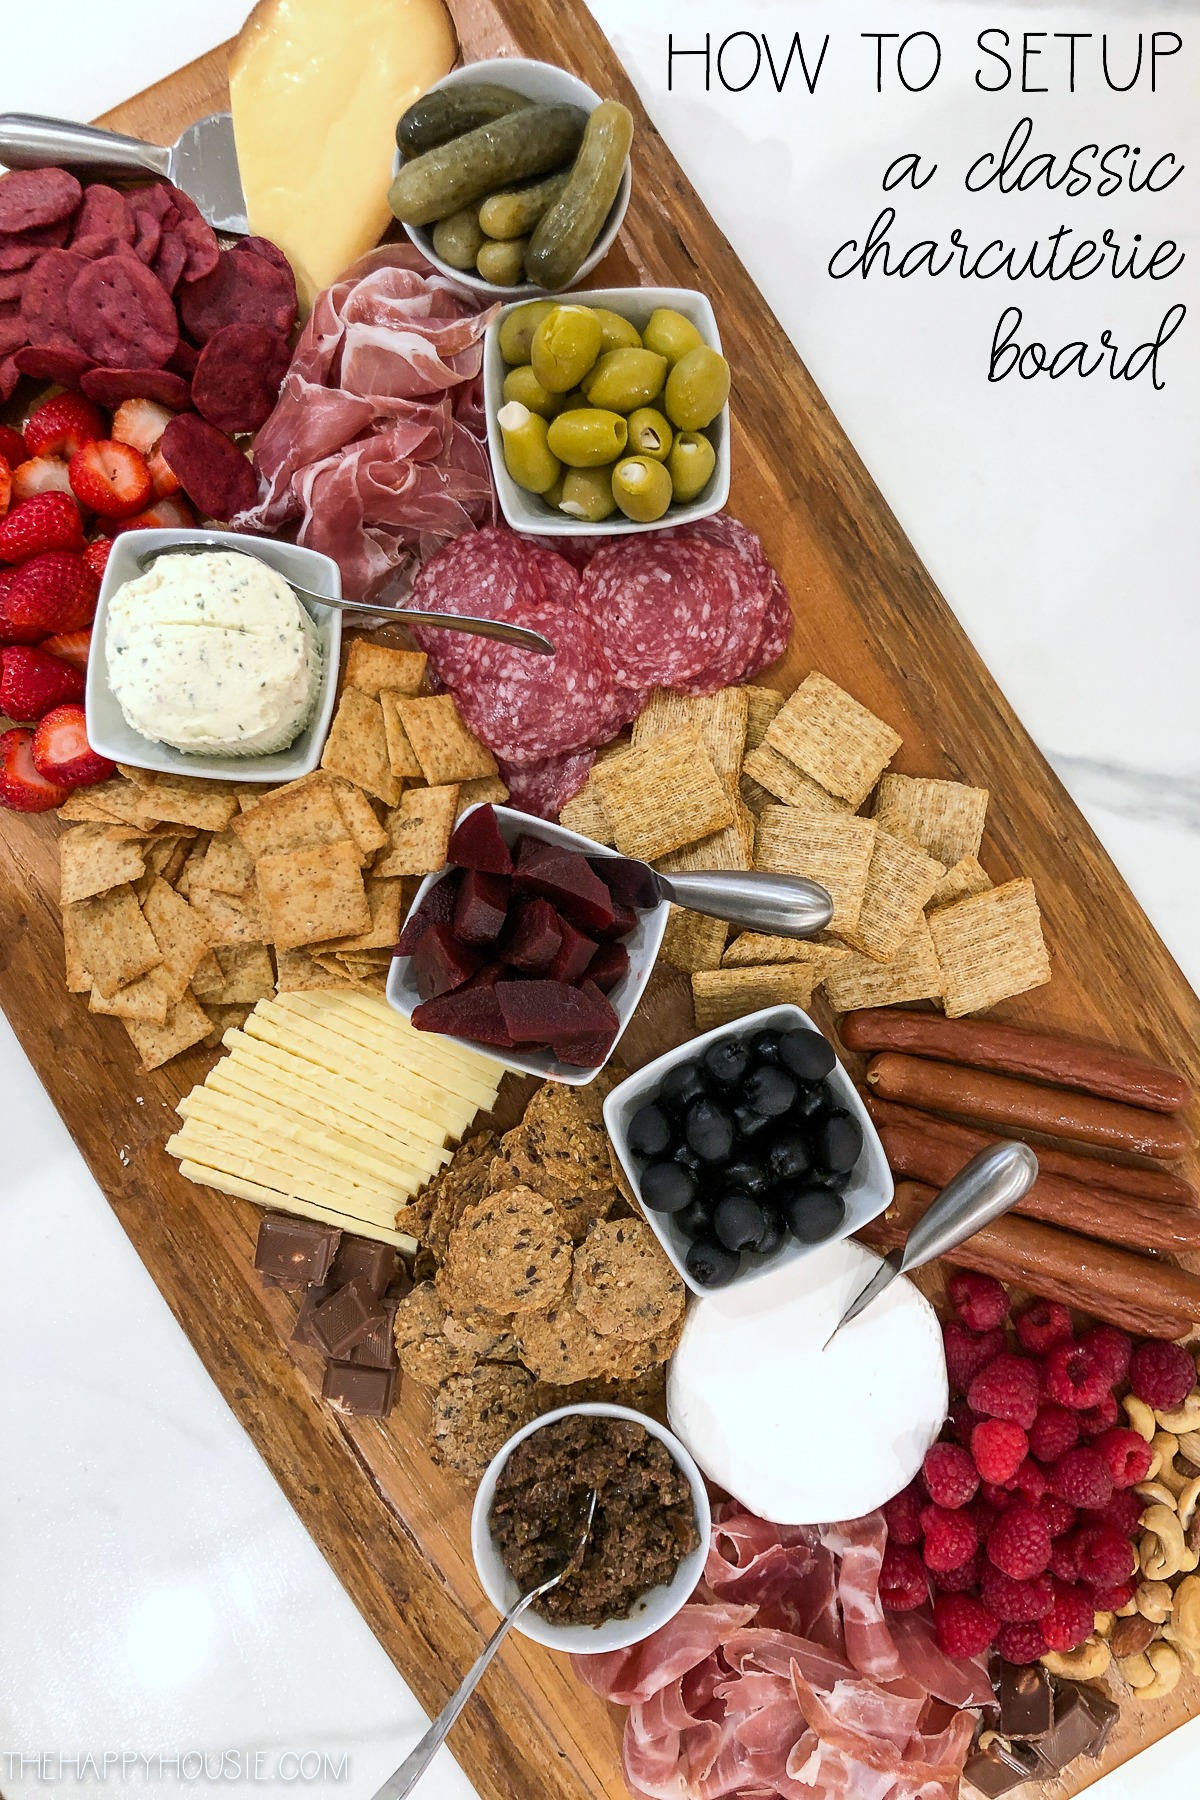 How to setup a classic charcuterie board graphic.